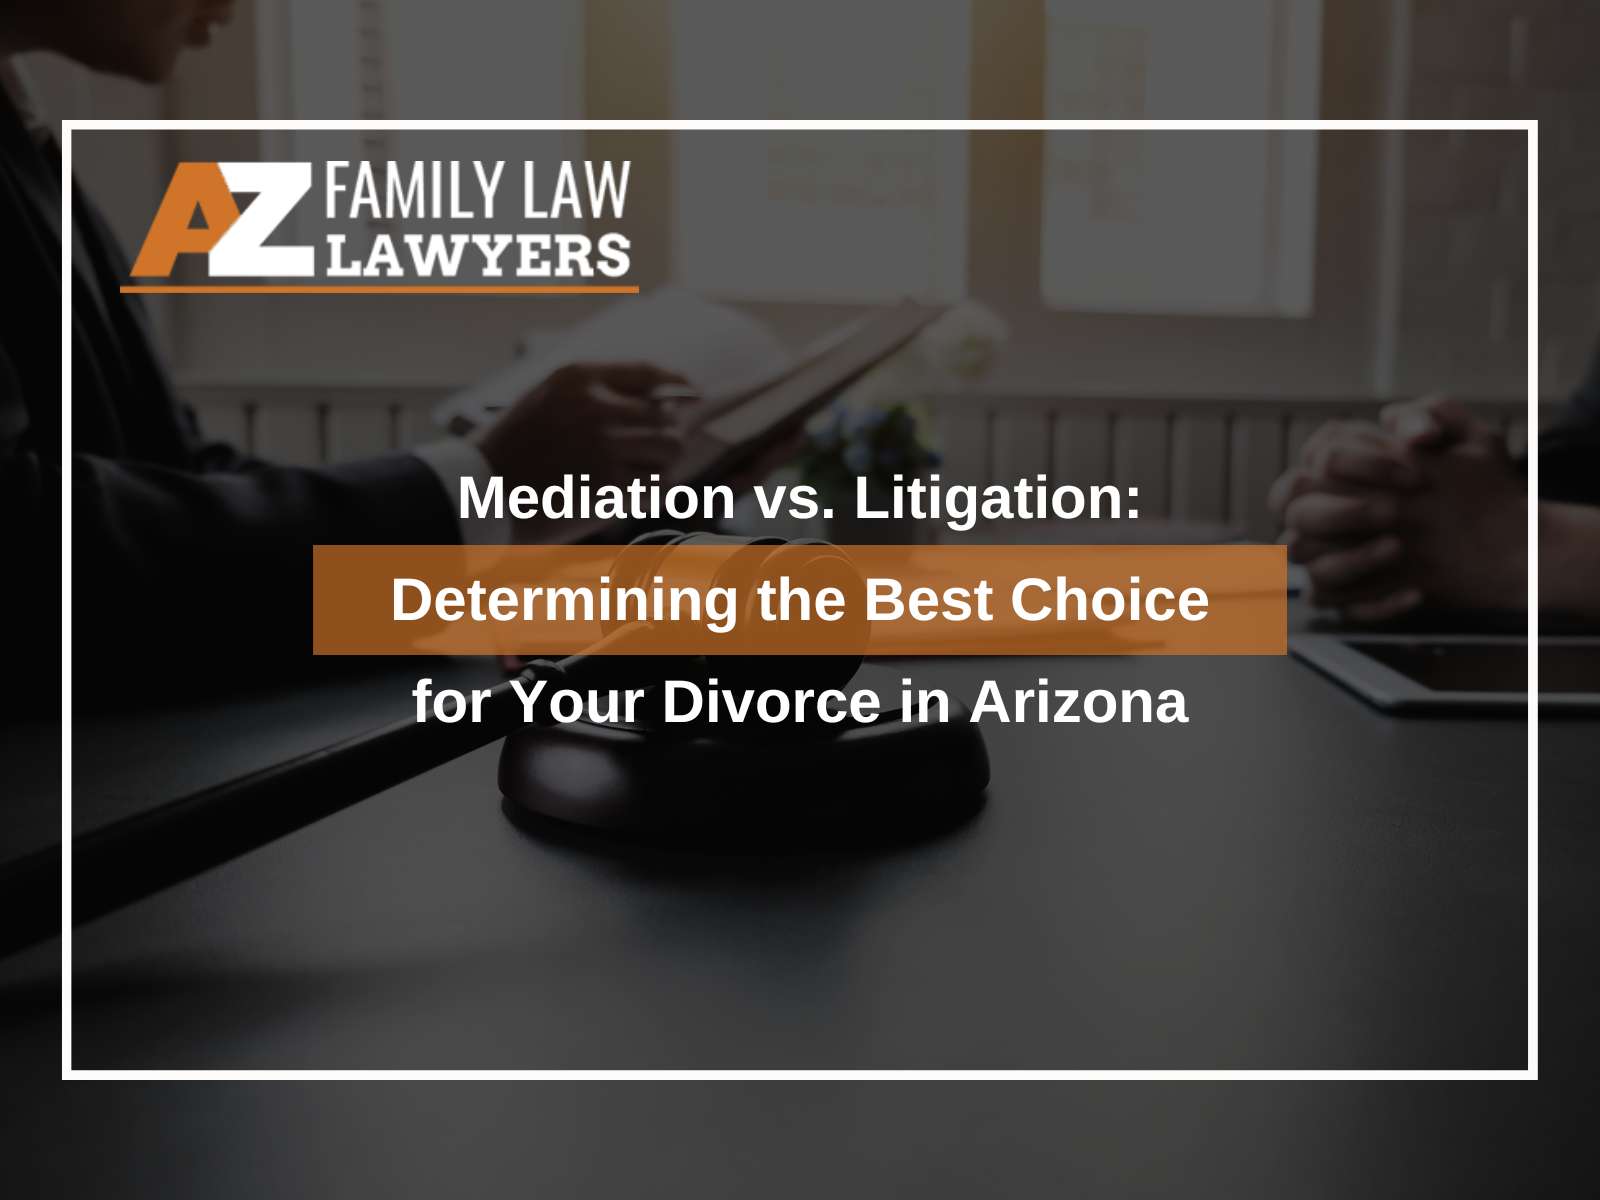 Mediation vs. Litigation: Determining the Best Choice for Your Divorce in Arizona